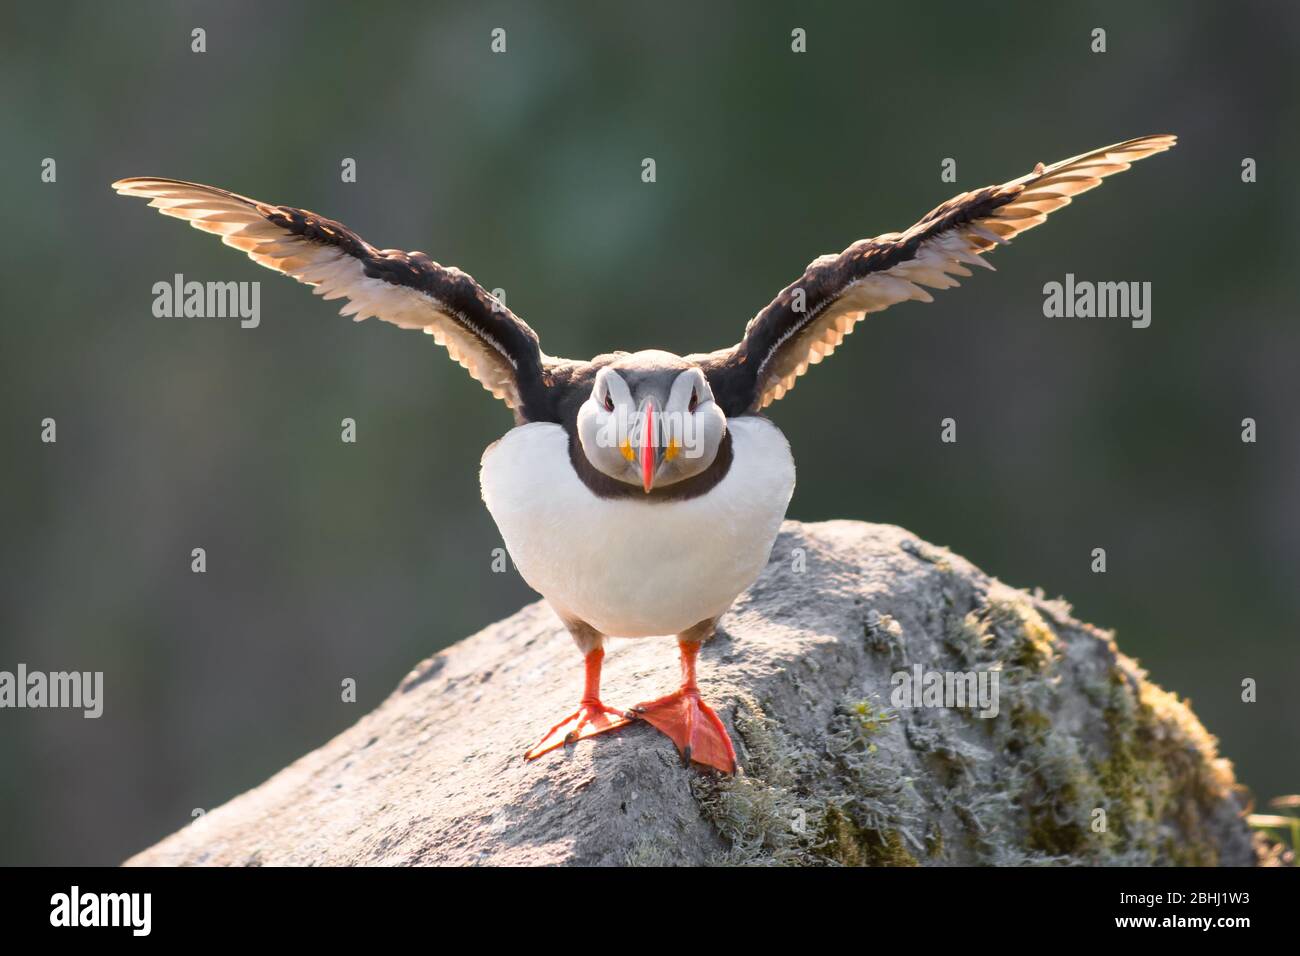 Atlantic Puffin (Fratercula arctica), perched on rock against a blurred background of green foliage Stock Photo